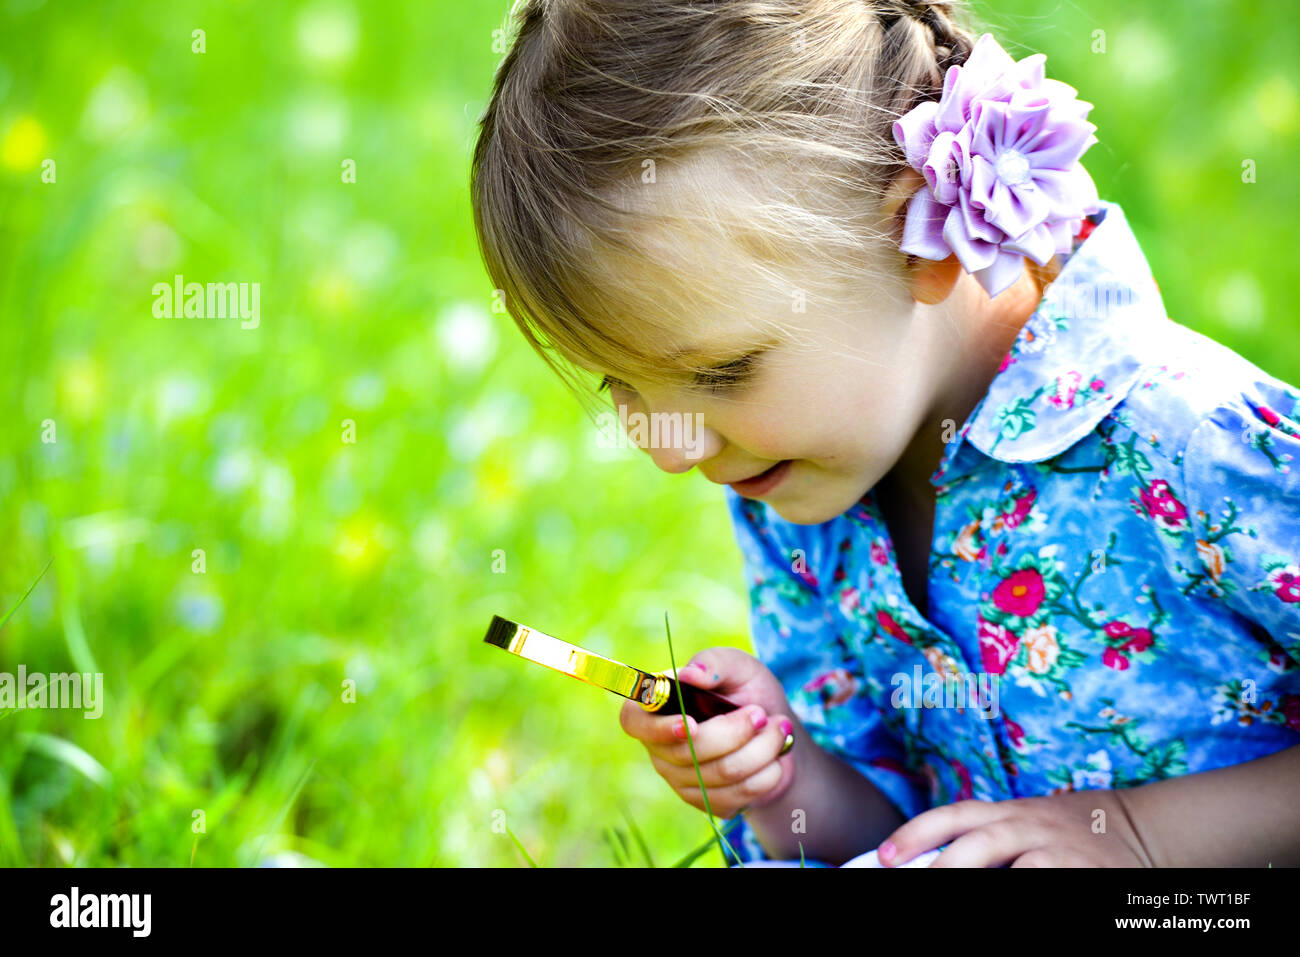 The child explores the grass in the meadow through a magnifying glass. Little girl exploring the flower through the magnifying glass outdoors. Stock Photo